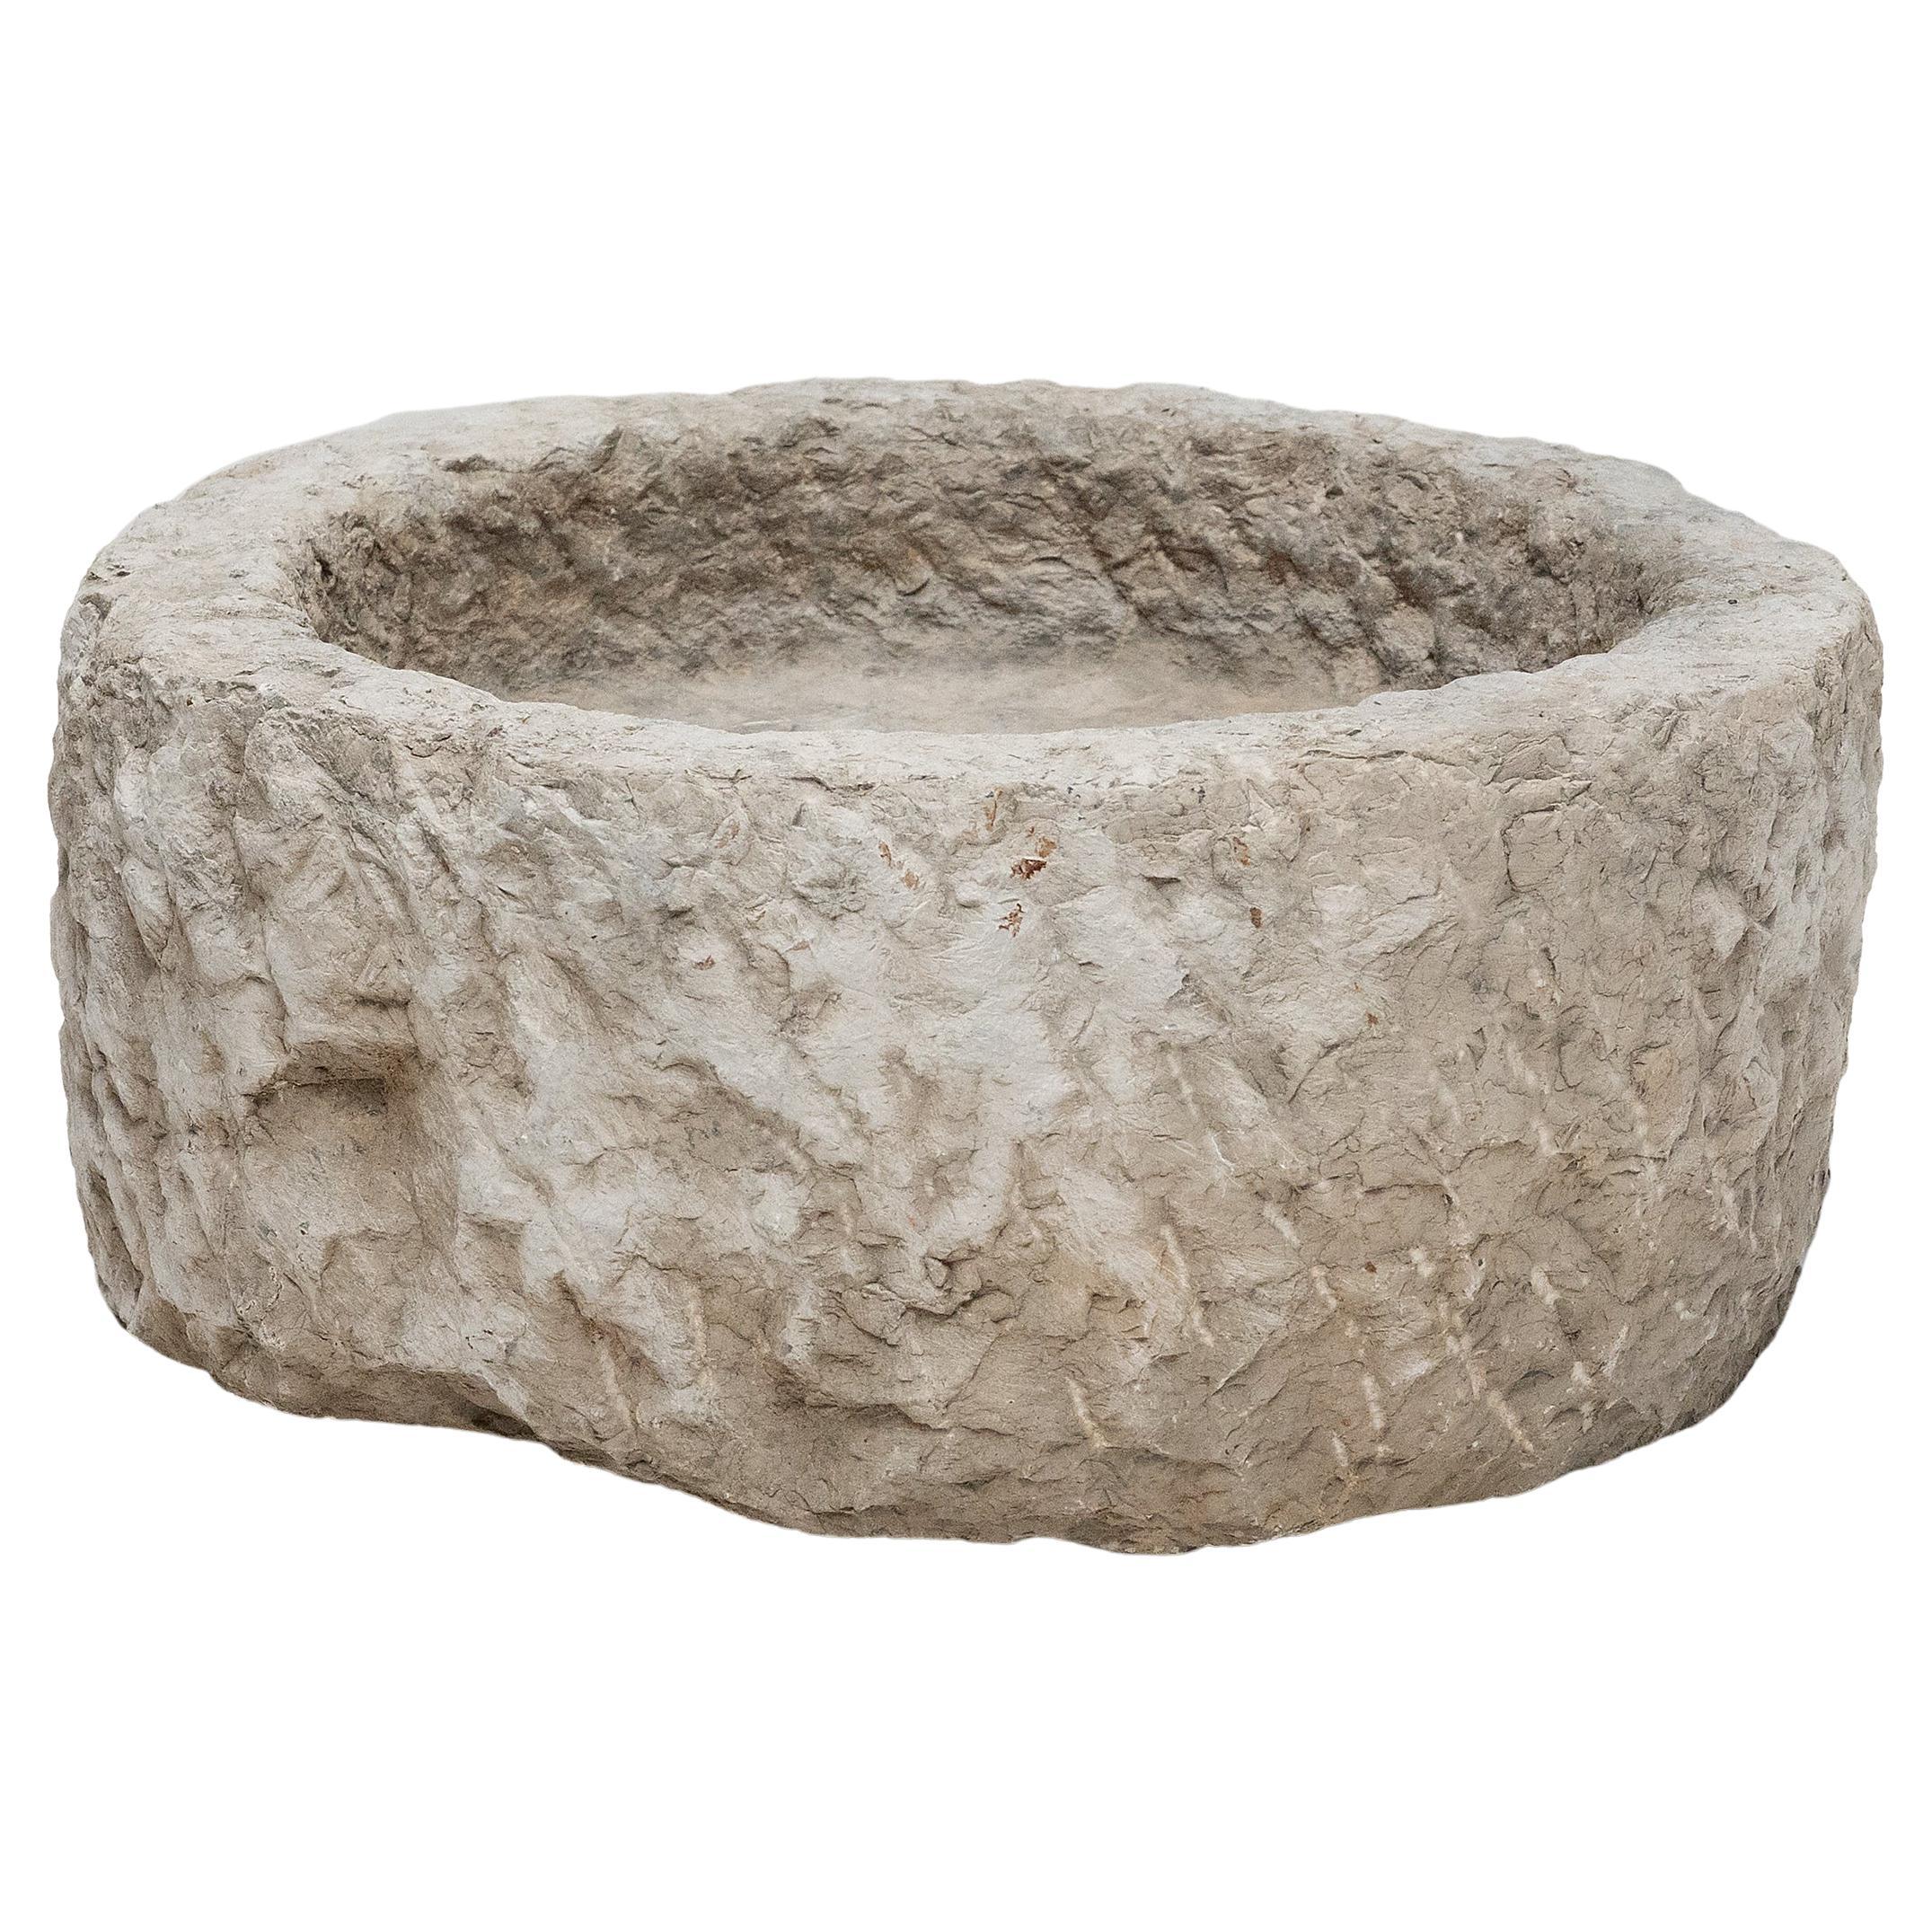  Full Moon Chinese Stone Trough, c. 1800 For Sale